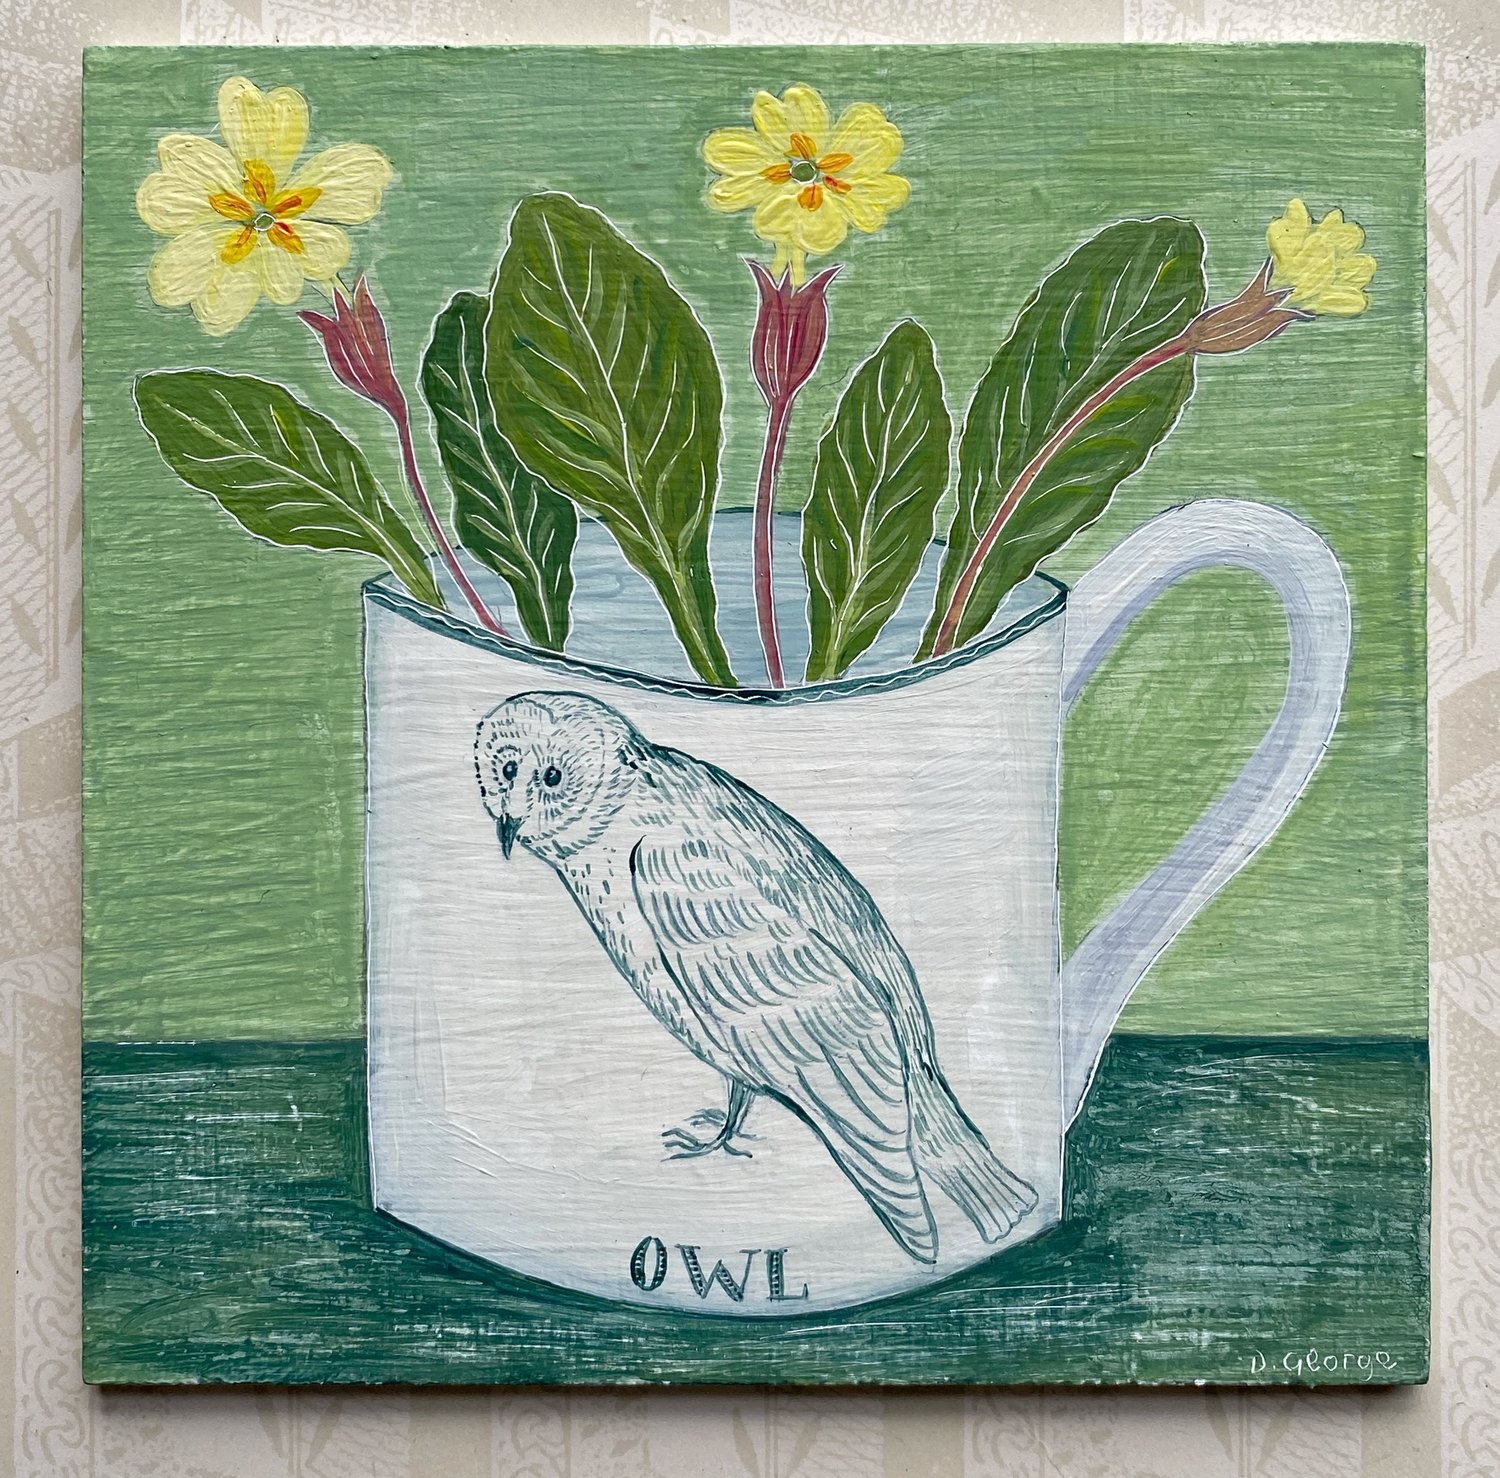 Image of Miniature owl cup and primroses 